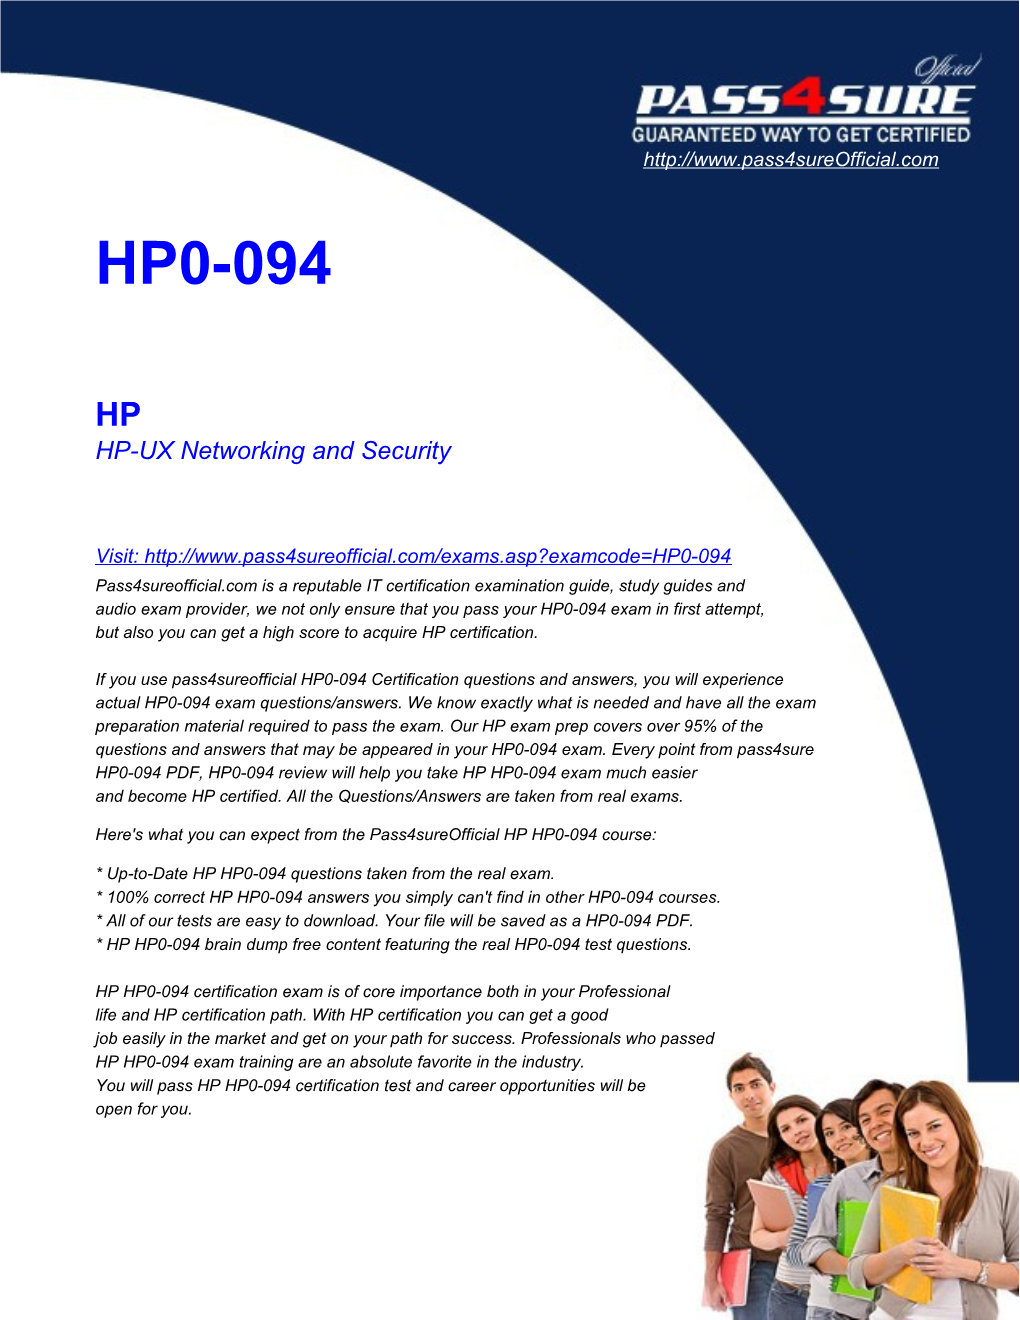 HP-UX Networking and Security